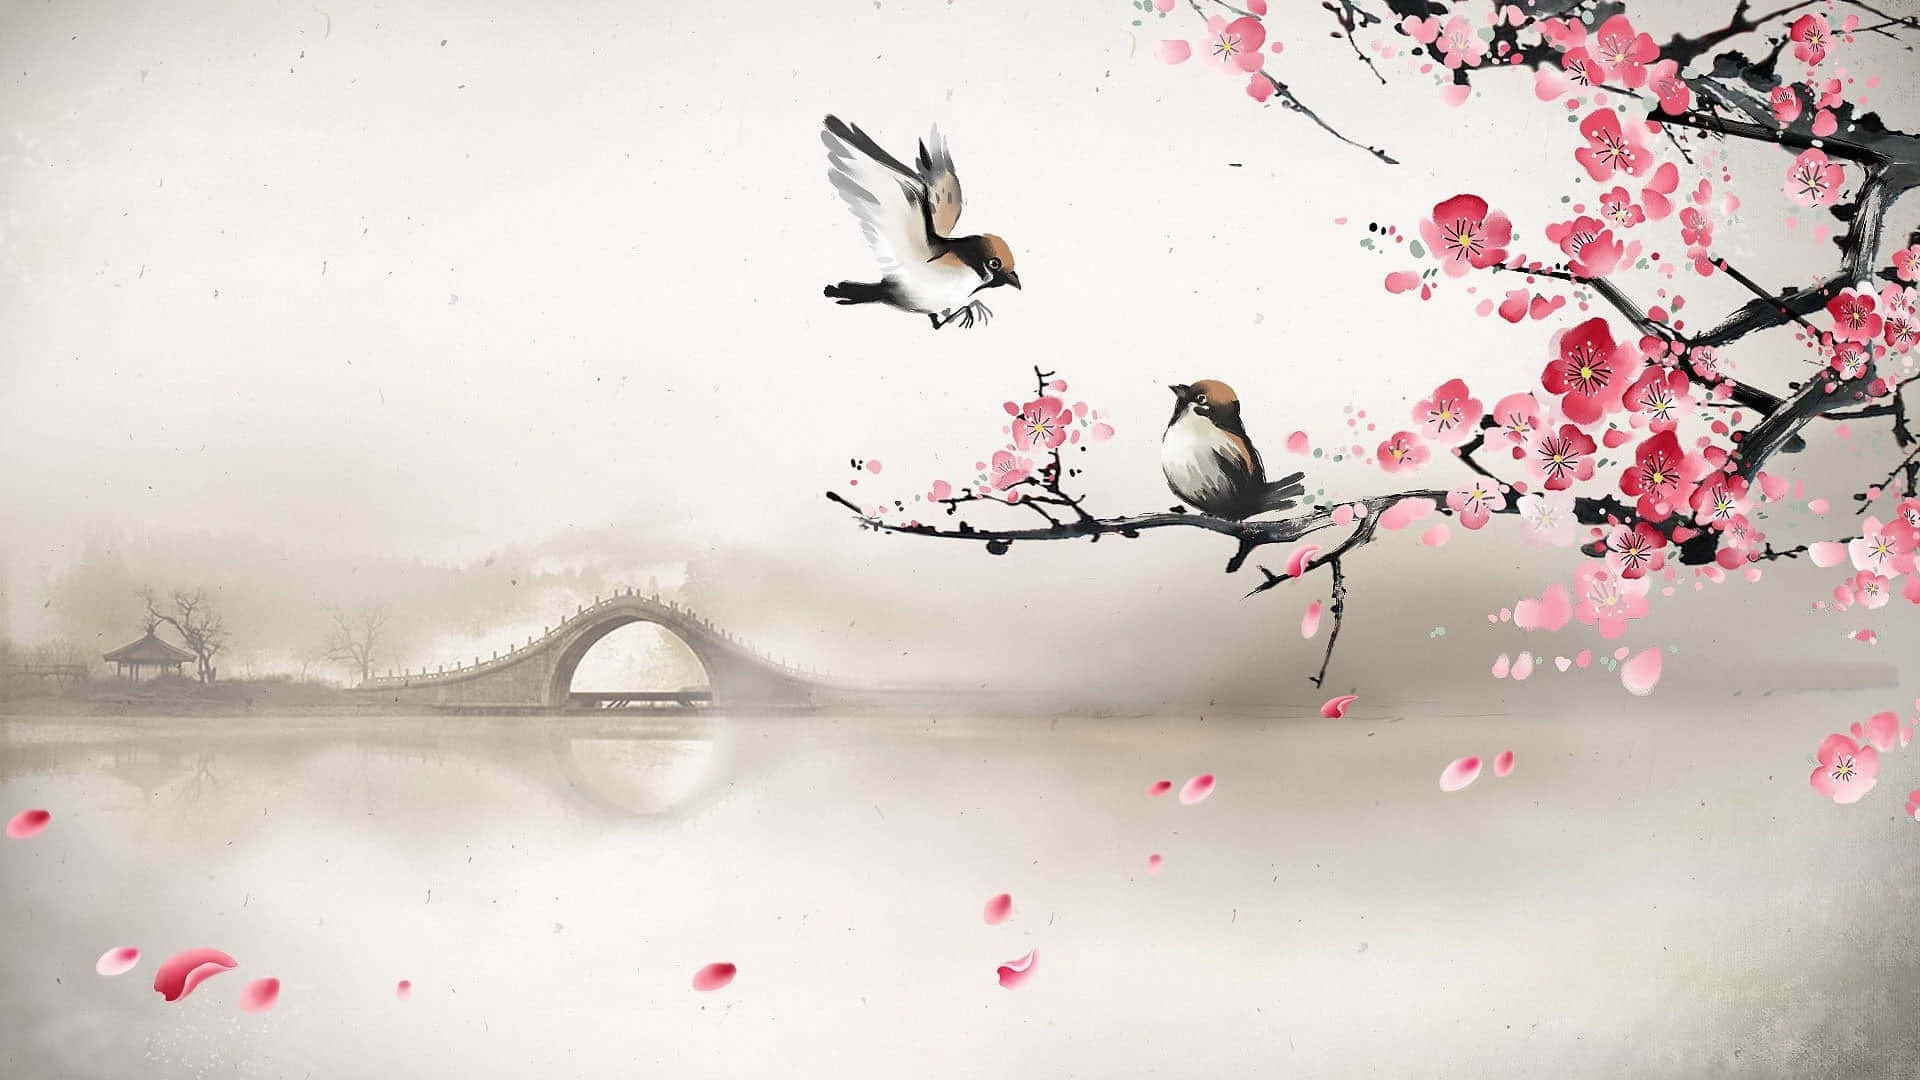 Two Birds Are Flying Over A Bridge Wallpaper